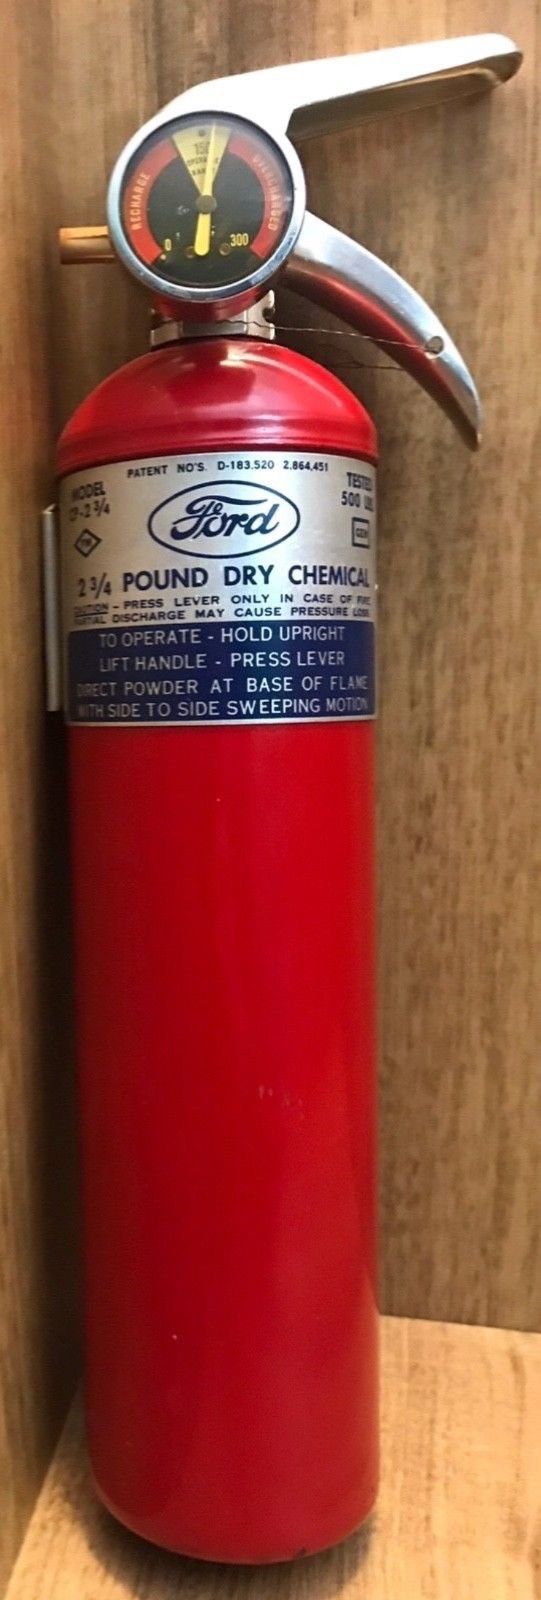 VINTAGE FORD Motor Co. Fire Extinguisher 1970 model cp-2 3/4 AMAZING COND